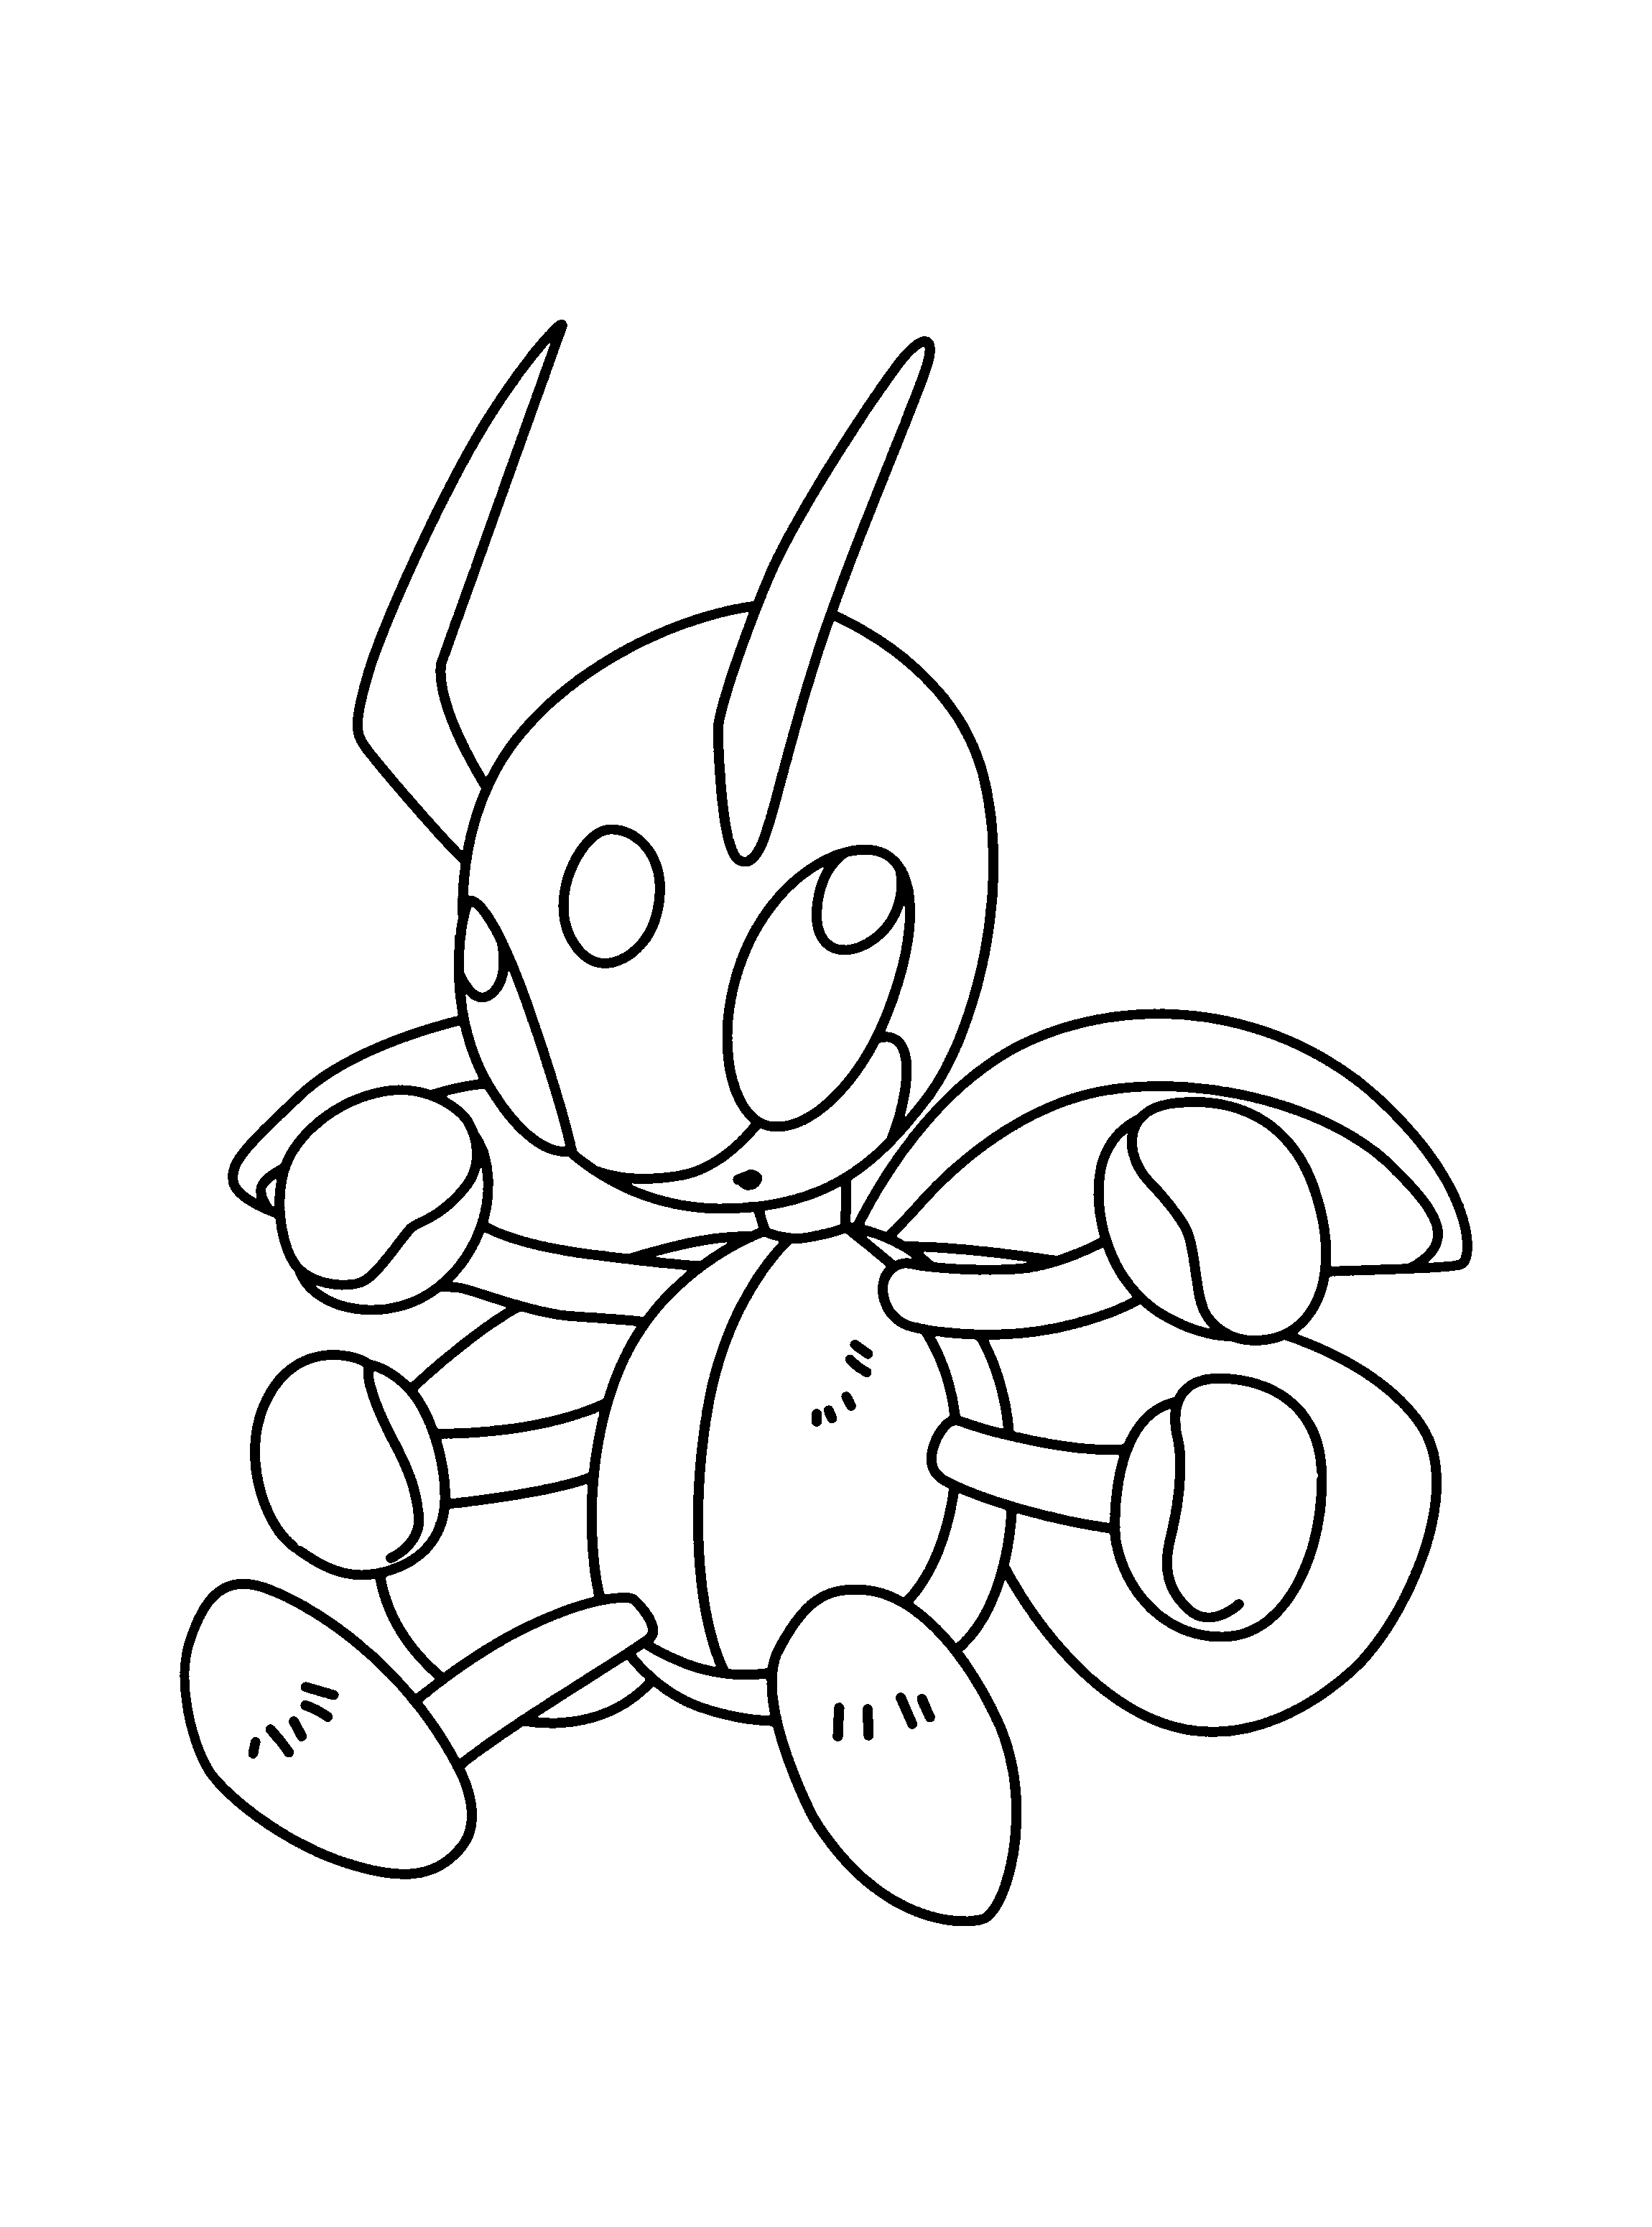 animated-coloring-pages-pokemon-image-0444